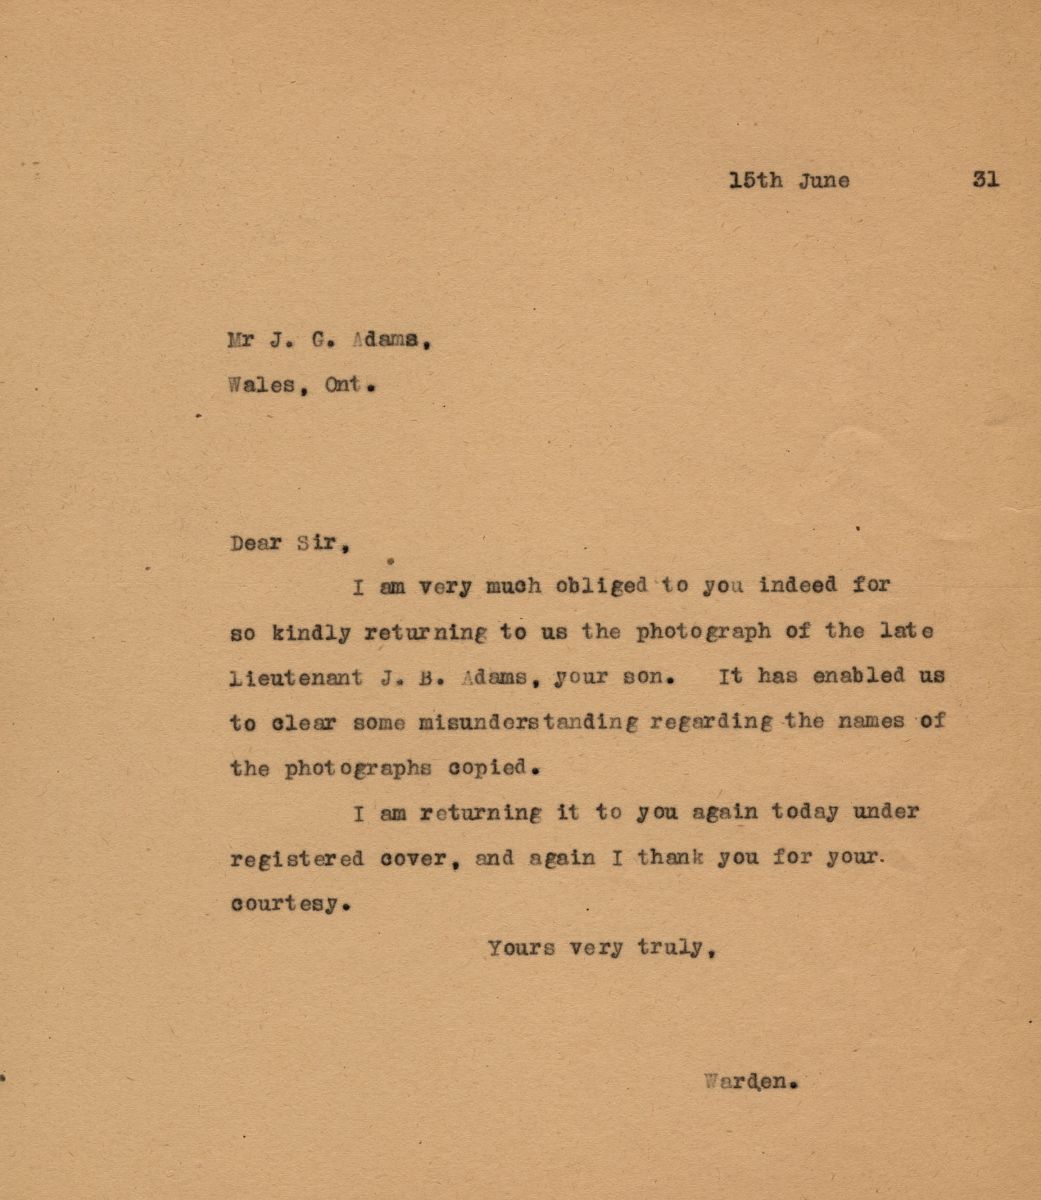 "Letter from the Warden to J.G. Adams, 15th June"